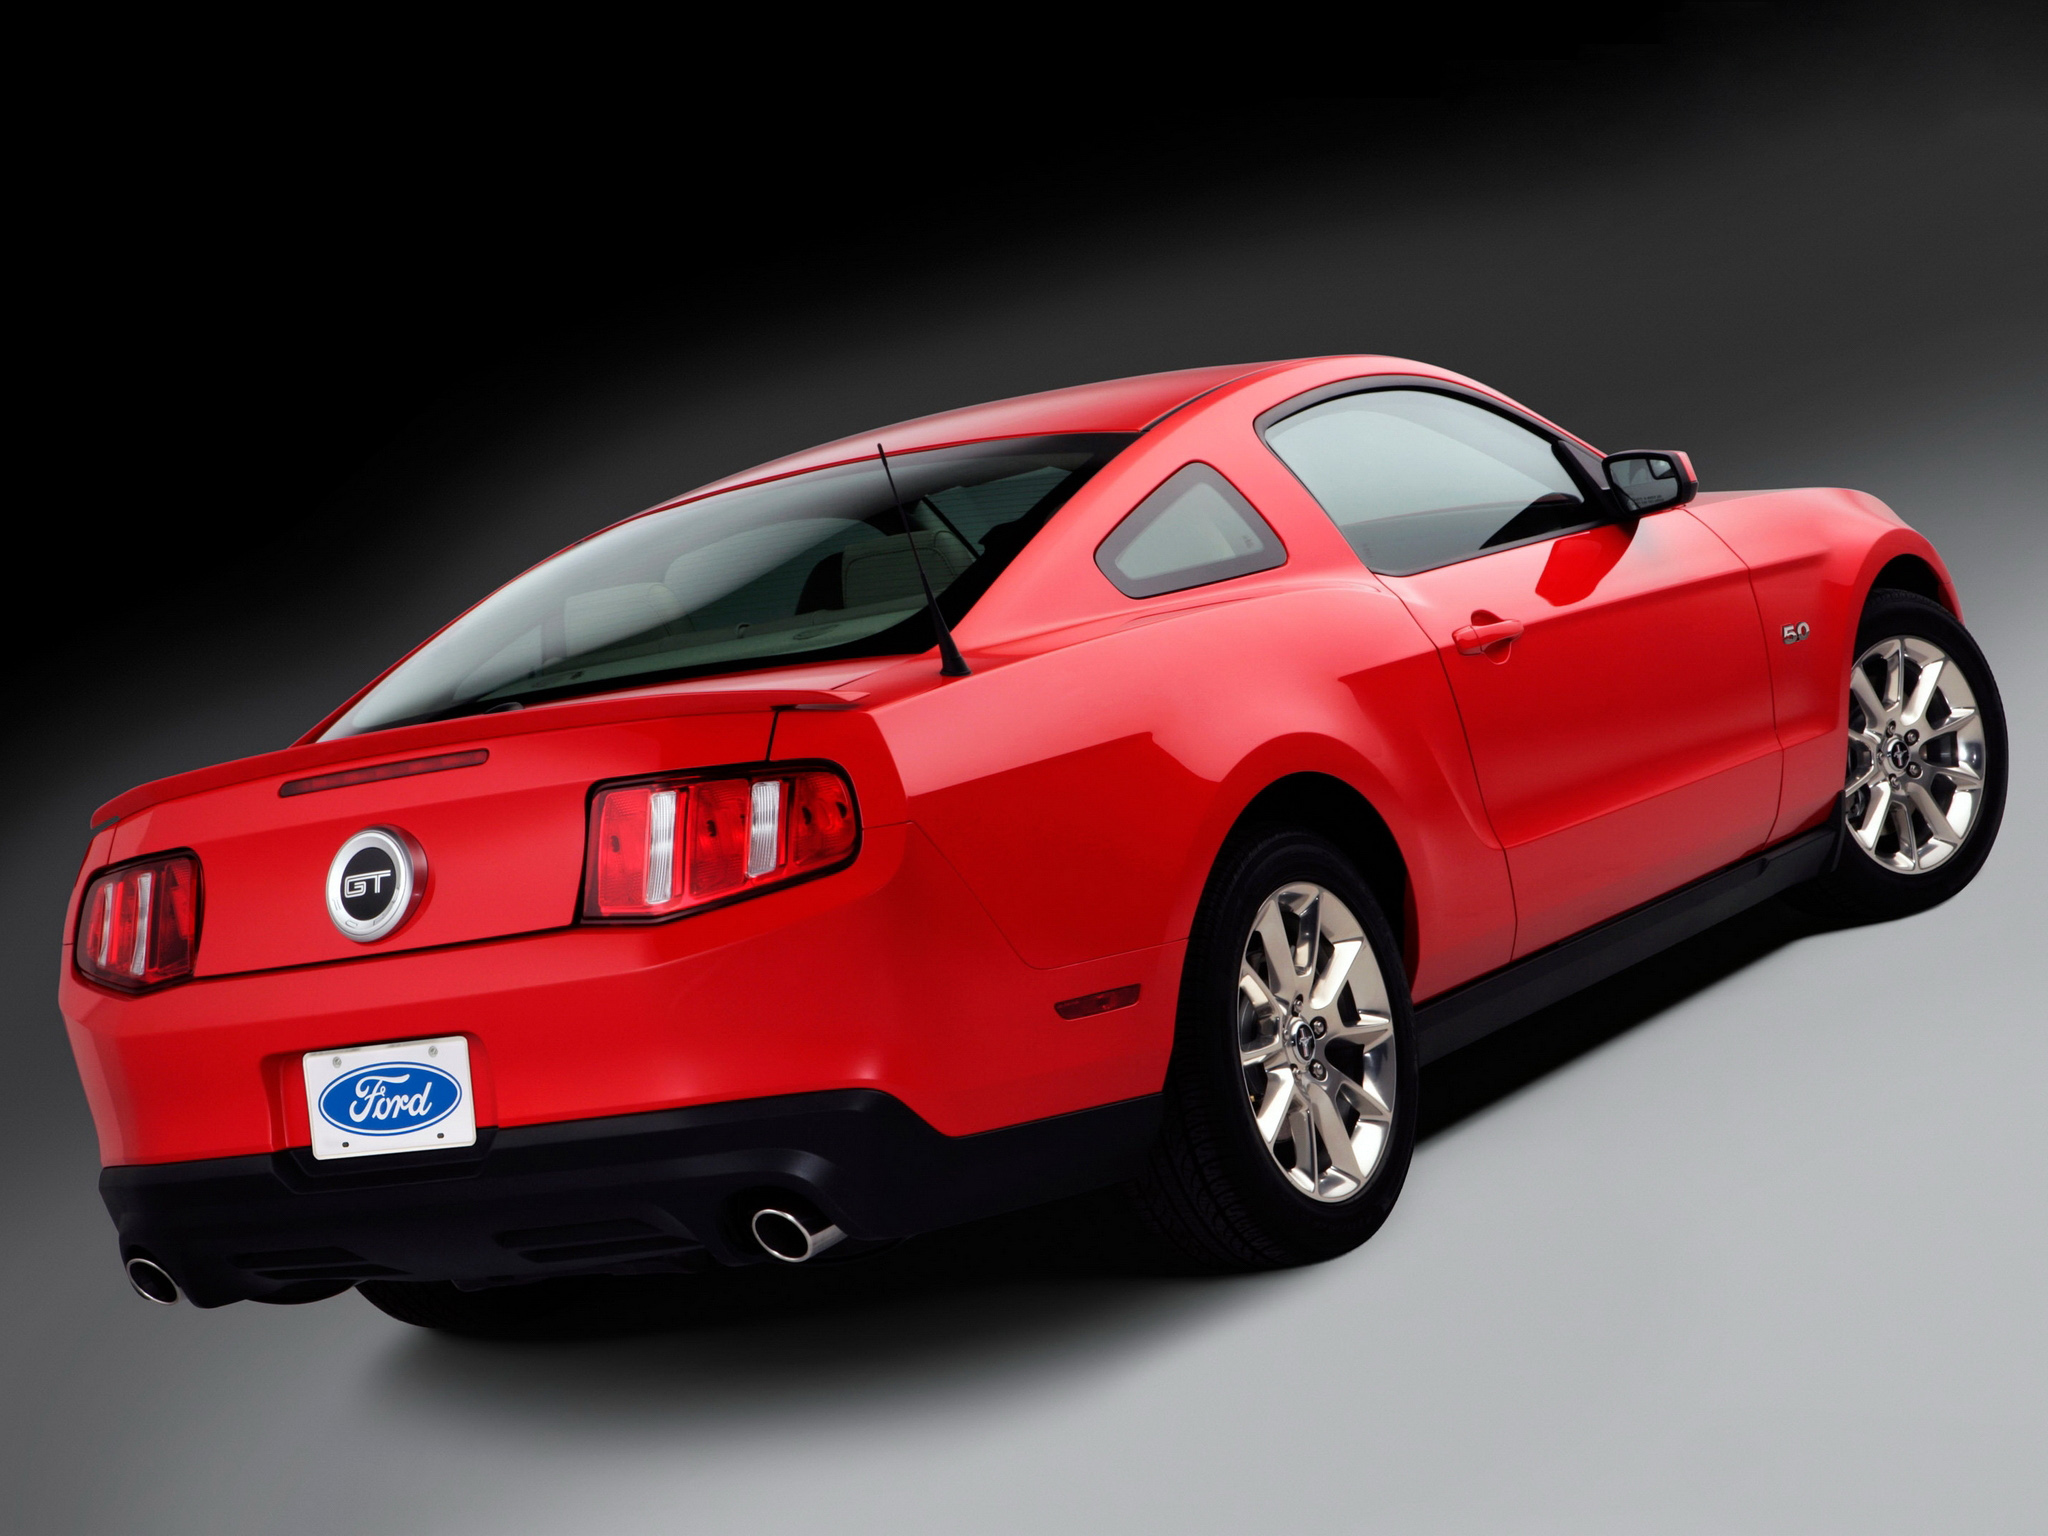 Download High quality red back 5.0 GT Mustang wallpaper / 2048x1536